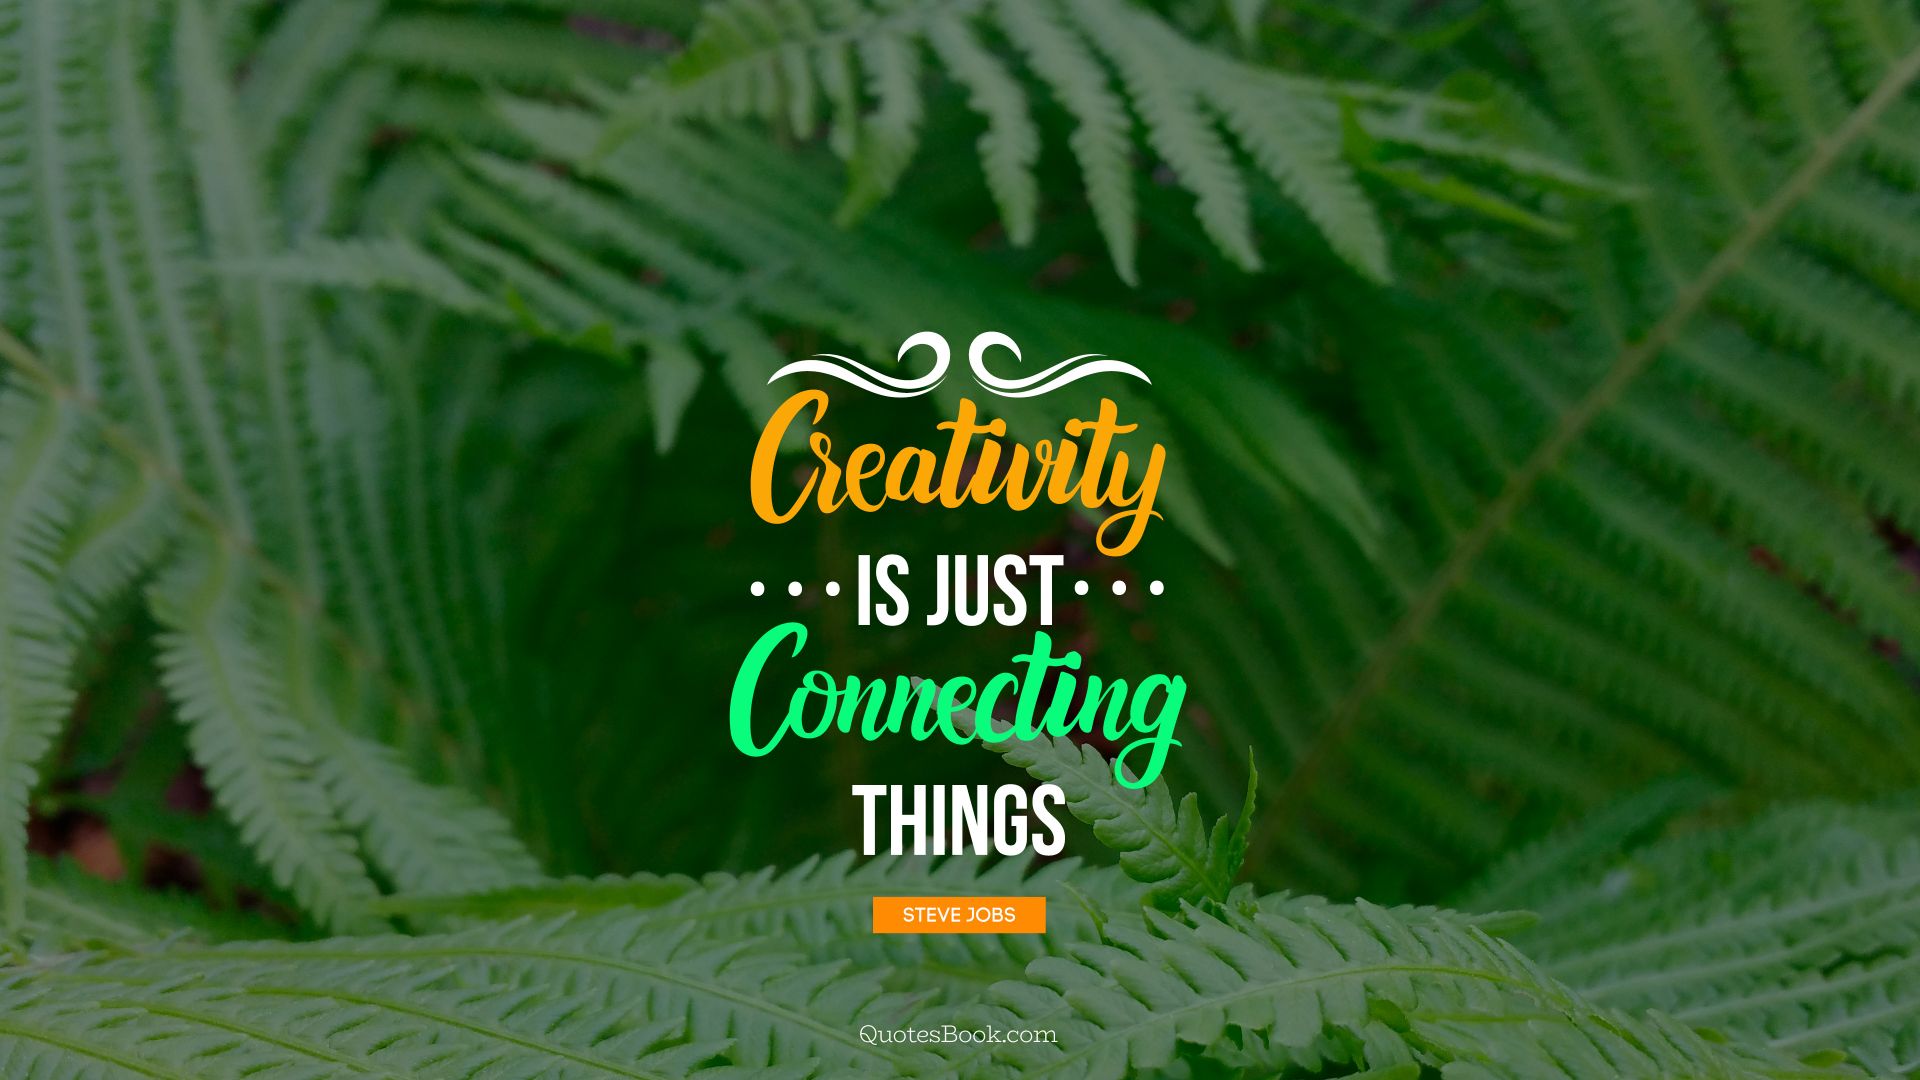 Creativity is just connecting things. - Quote by Steve Jobs